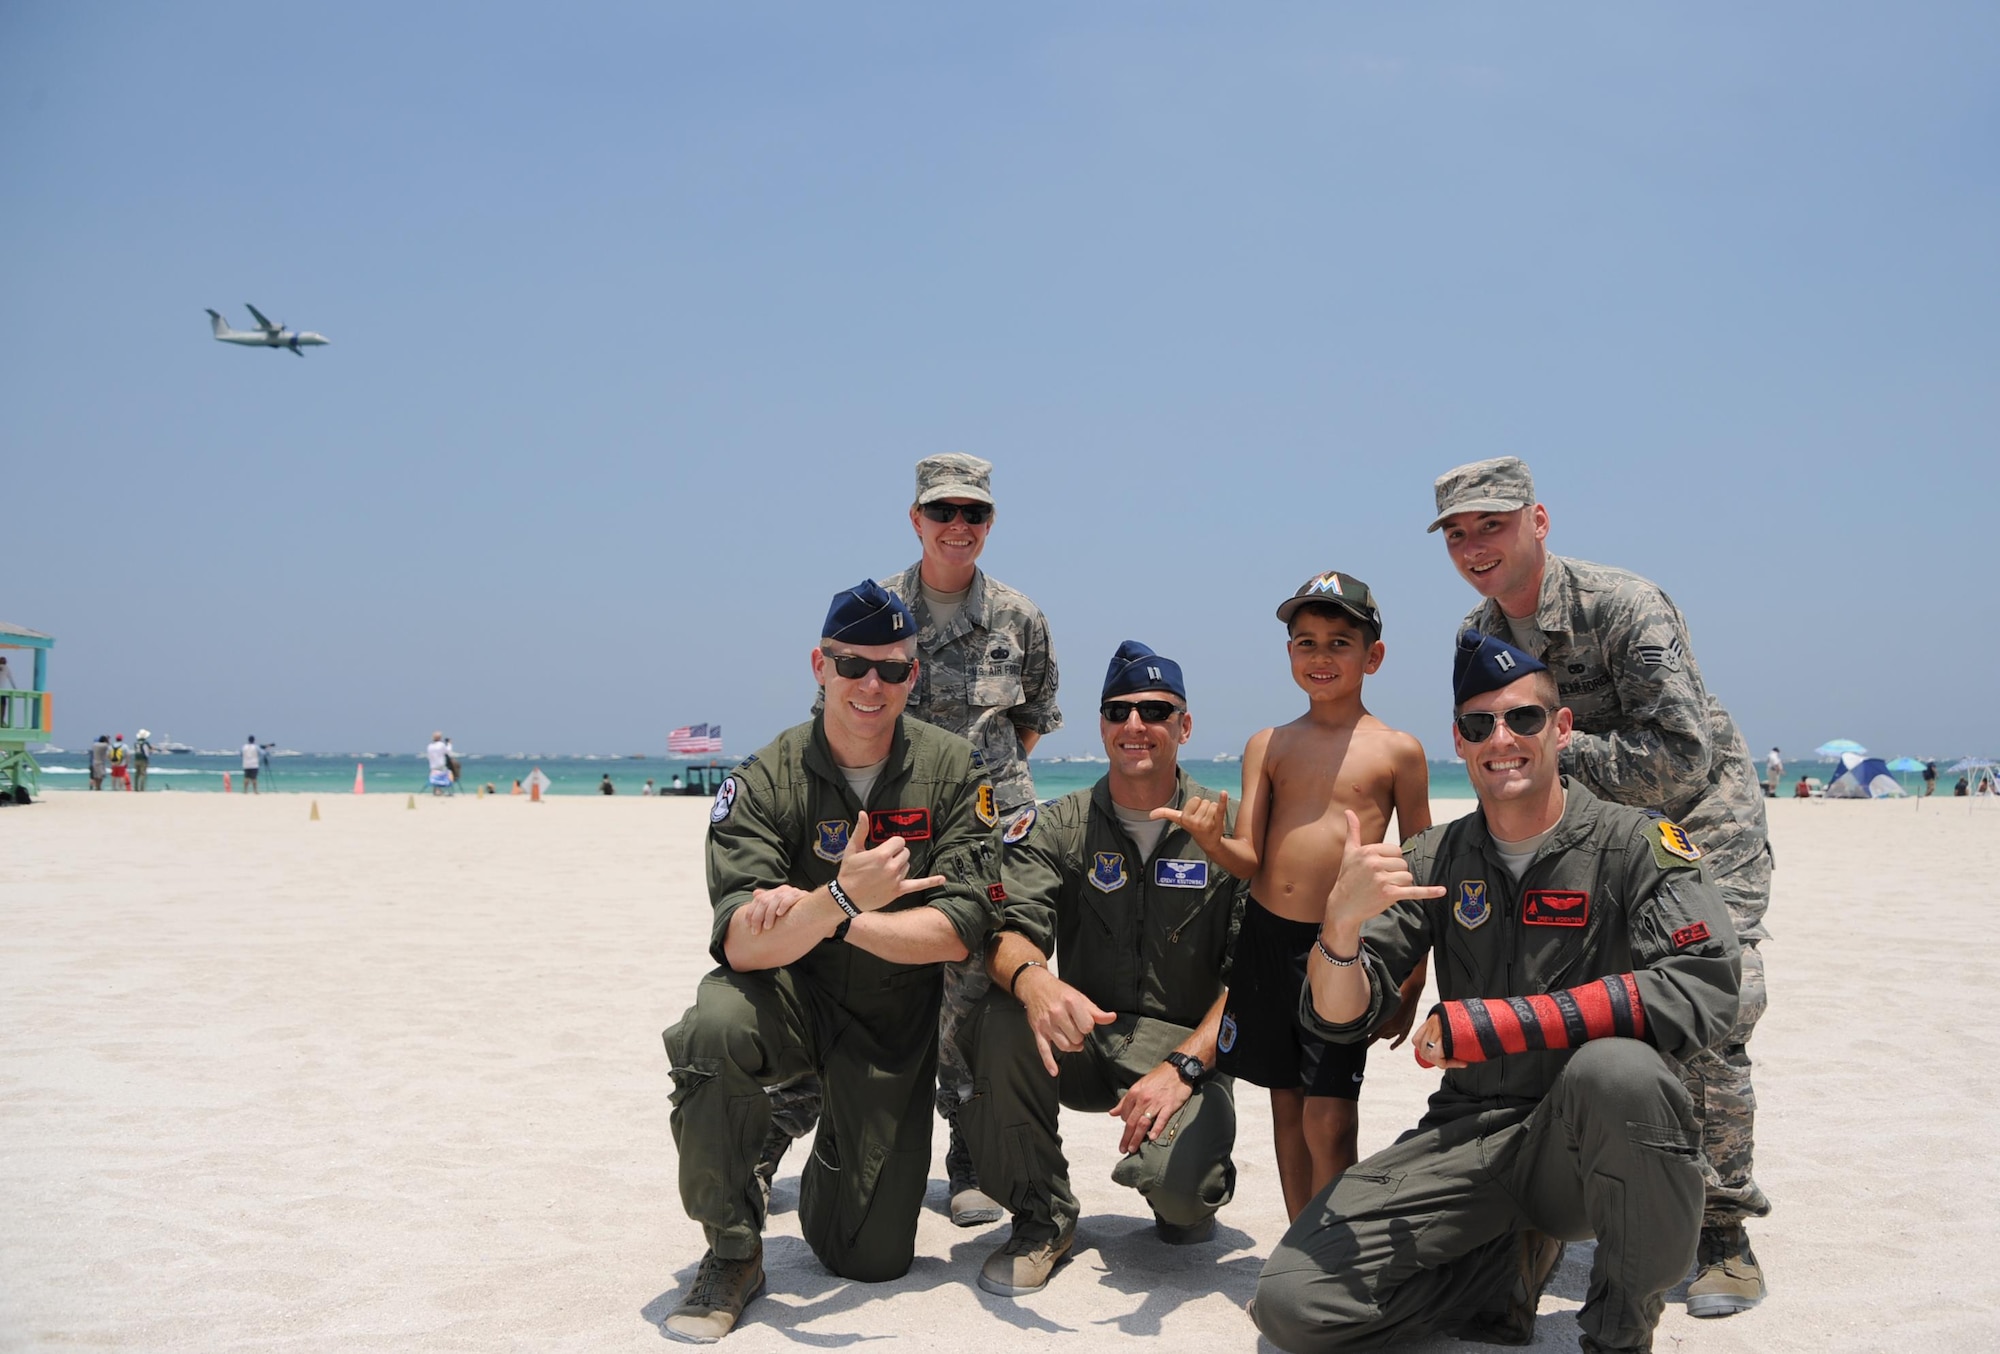 U.S. Air Force service members attend the Salute to America’s Heroes Air and Sea Show in Miami Beach, Fla., May 28, 2017, to interact with the local public, educate and build community relations. Eighth Air Force bomber aircraft performed flyovers to provide the public with a capability display. (U.S. Air Force photo by Senior Airman Erin Trower)